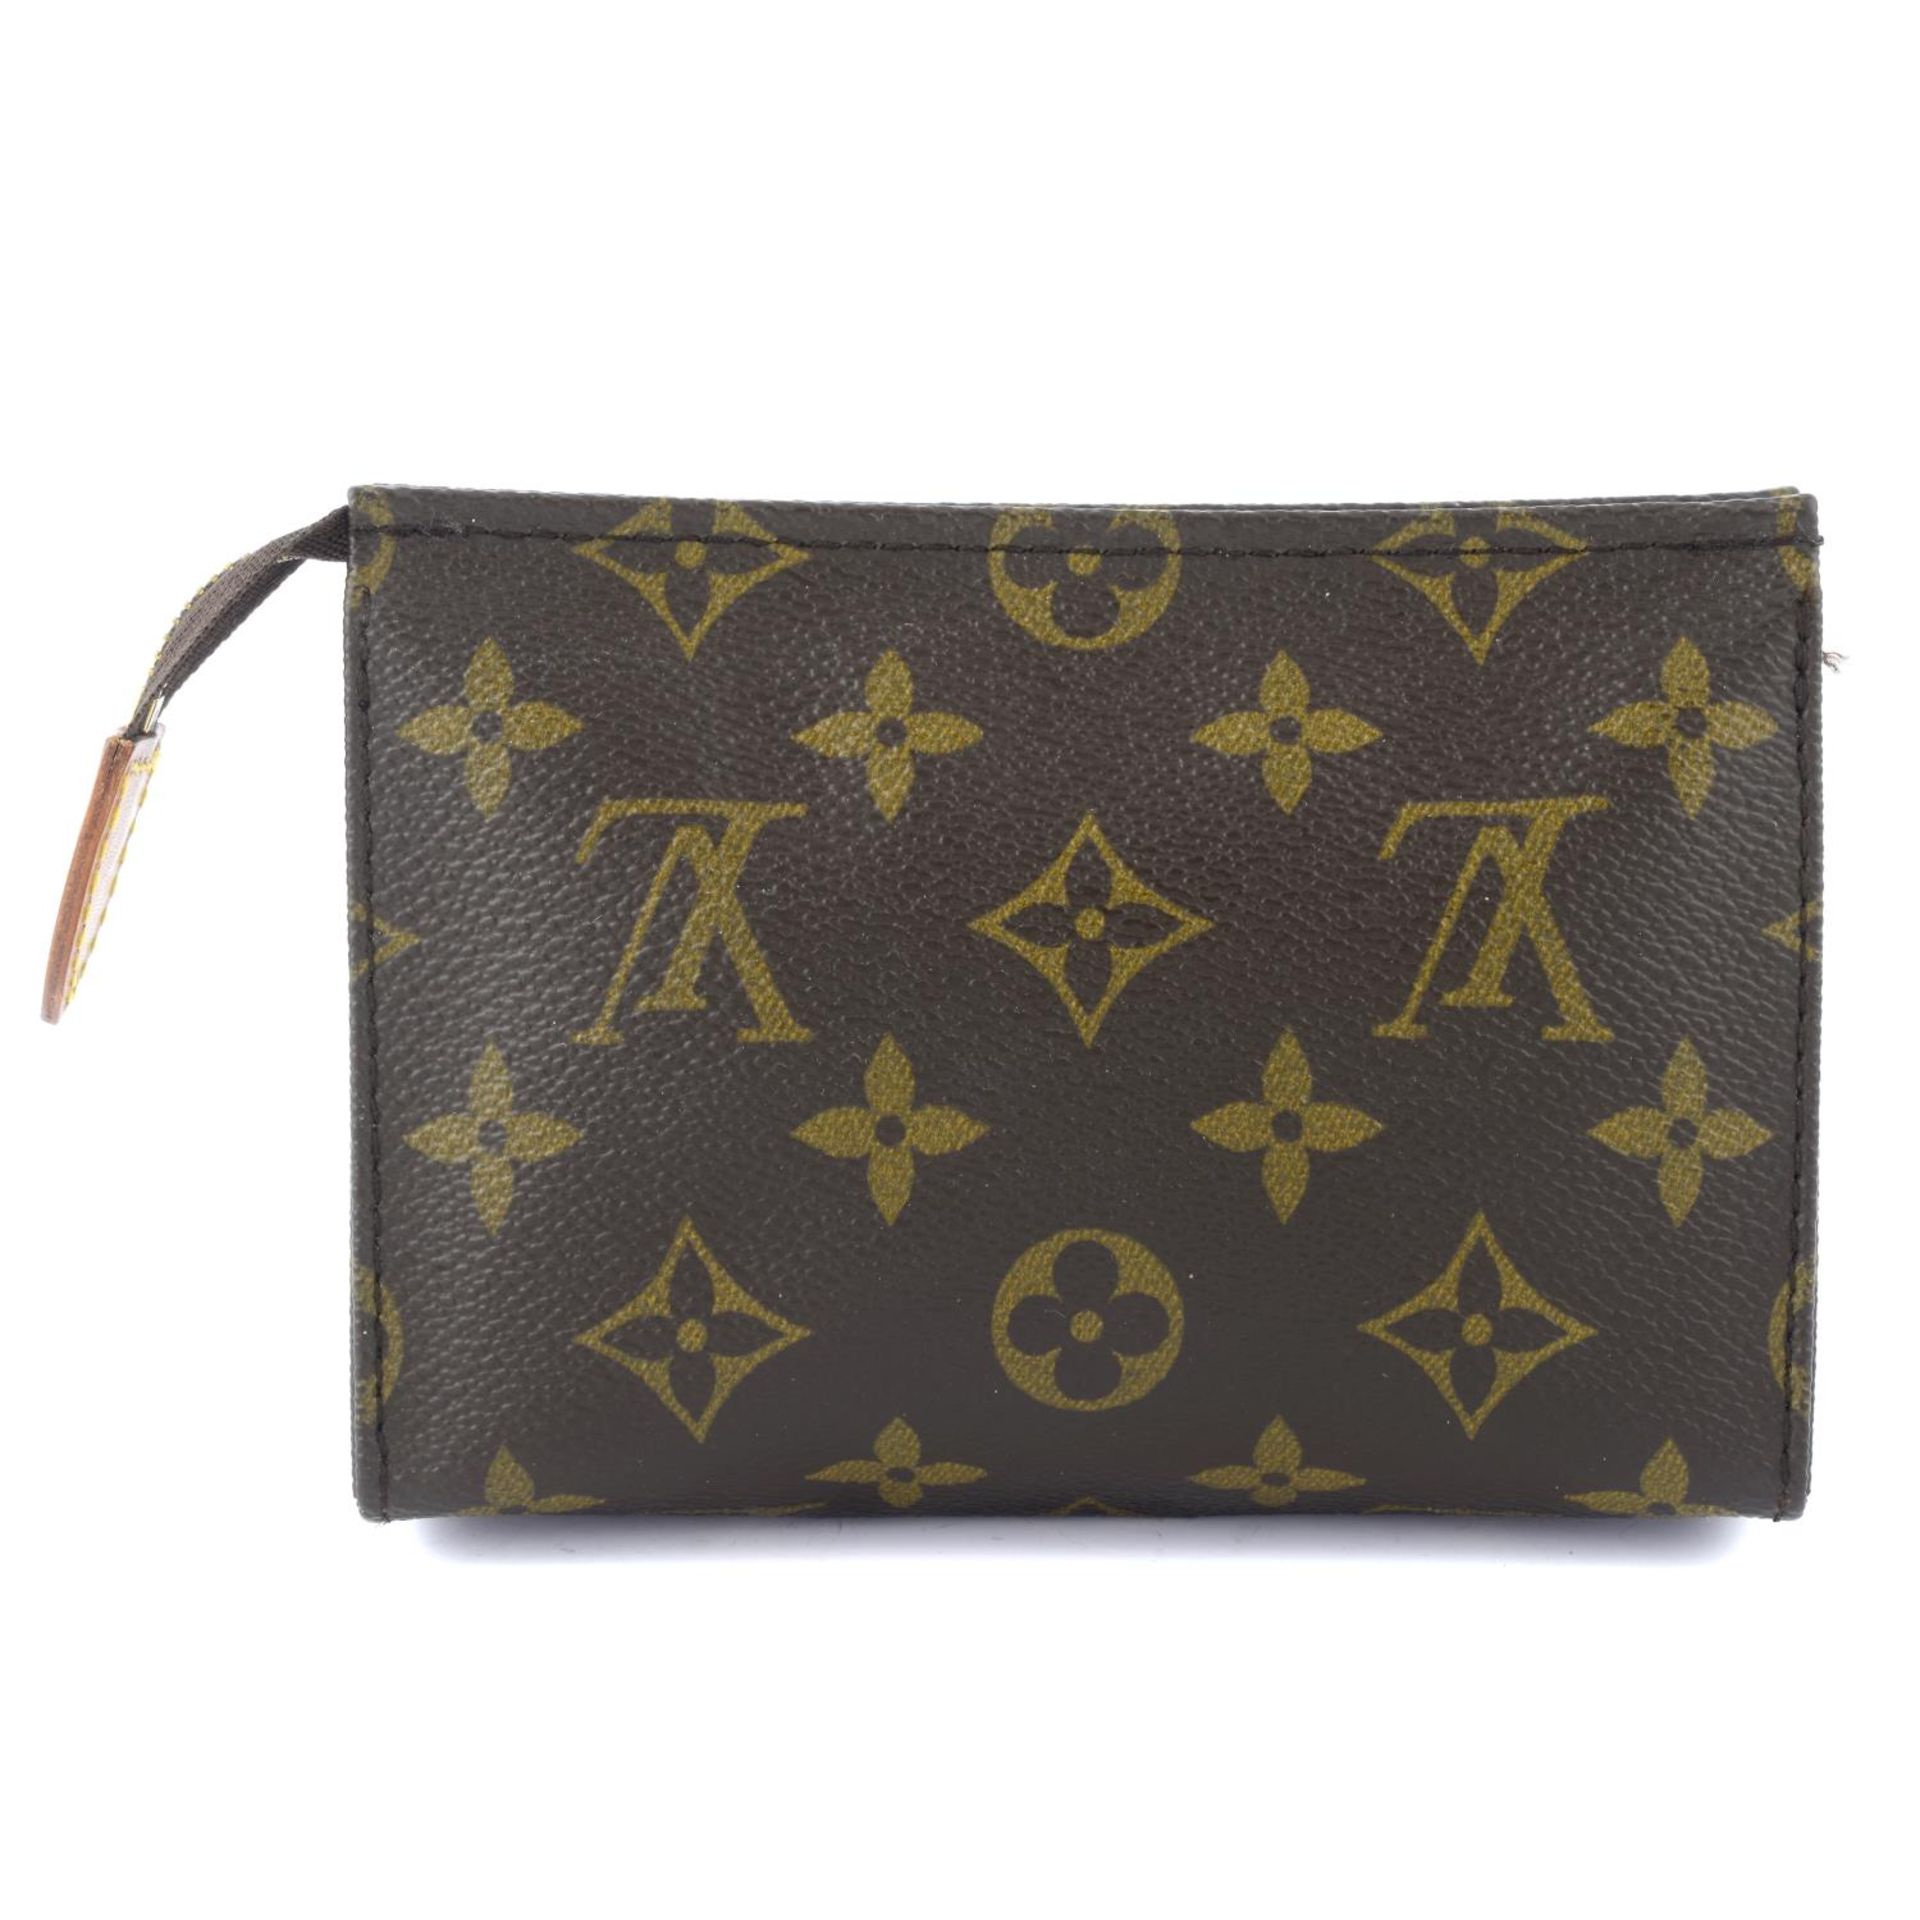 LOUIS VUITTON - a Monogram Toiletry pouch. - Image 2 of 4